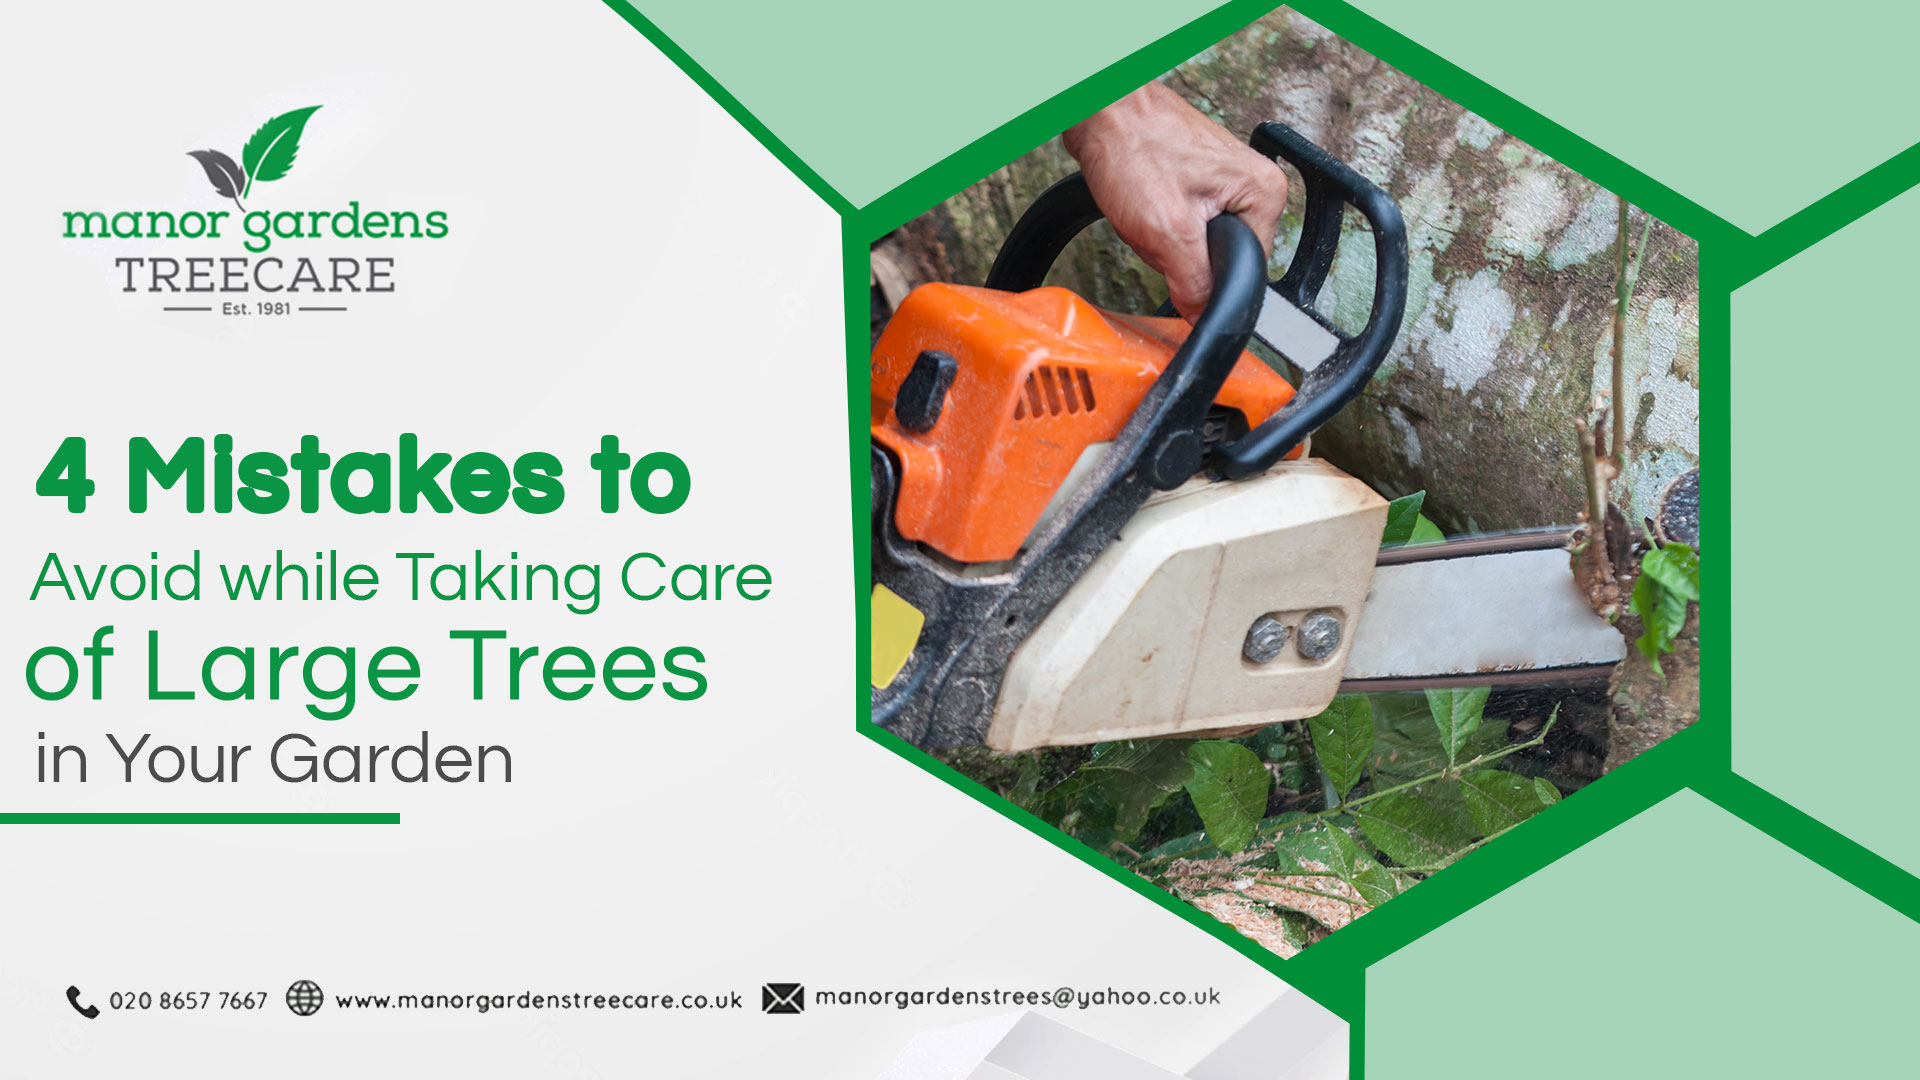 tree surgeon in Bromley